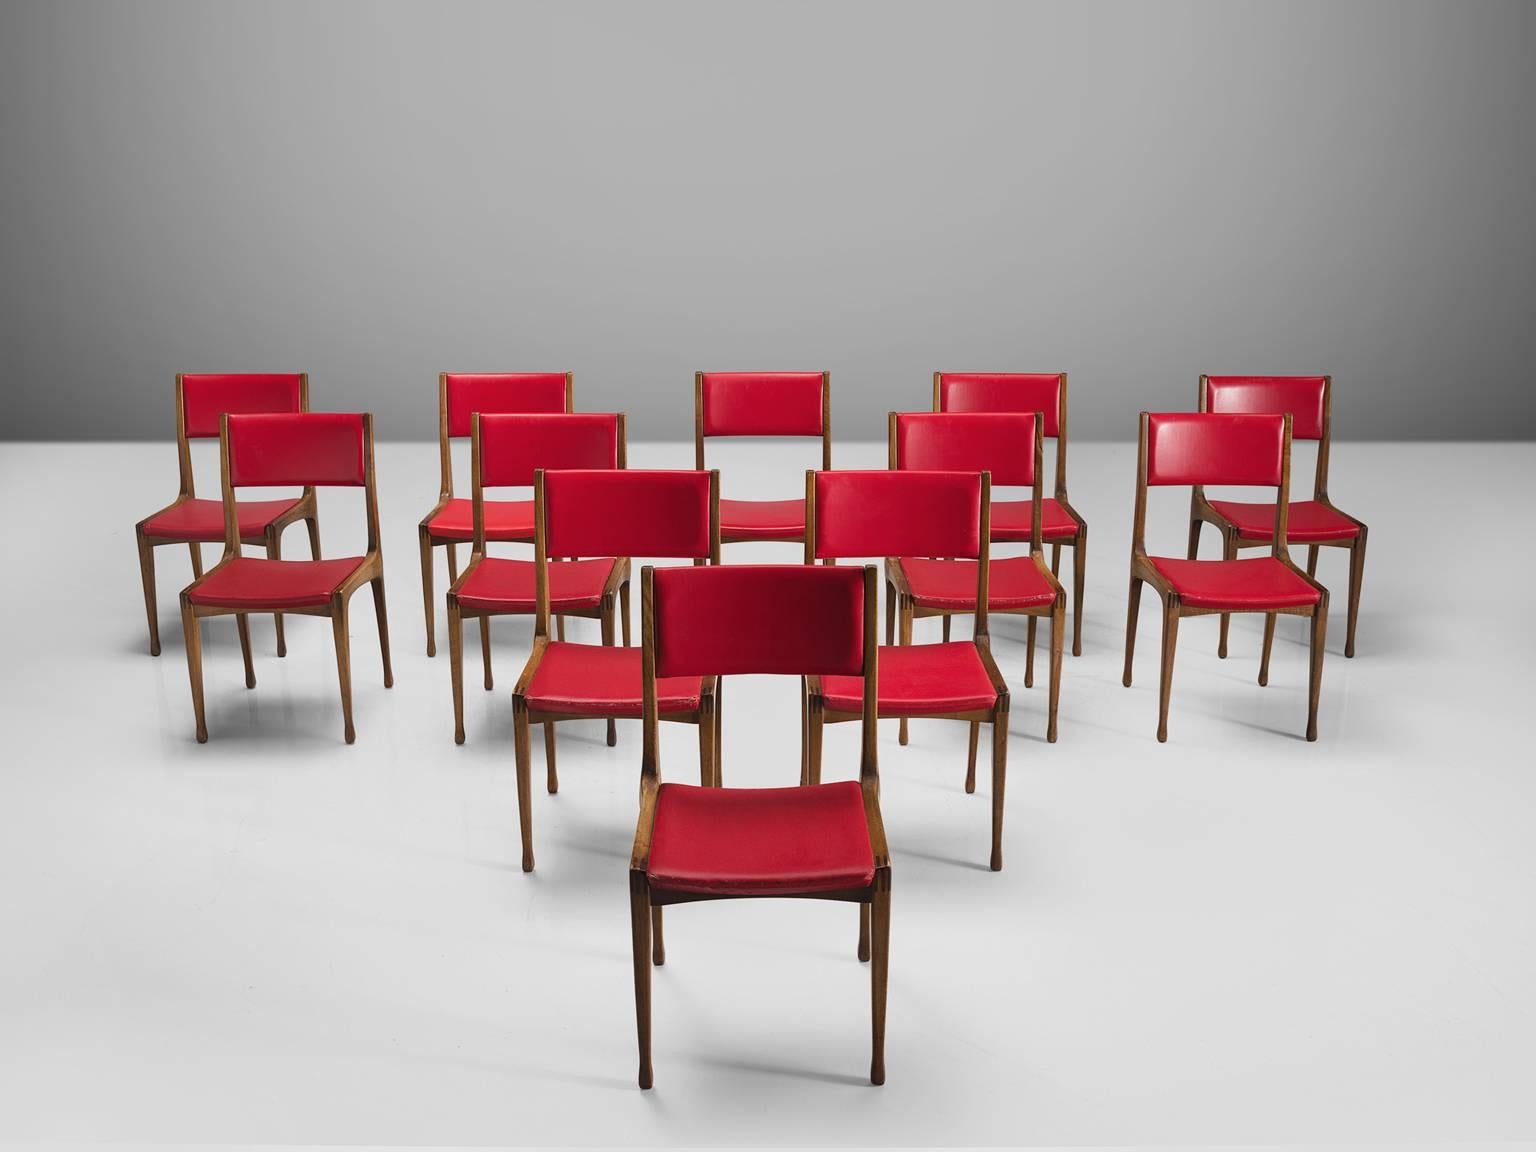 Carlo de Carli for Cassina, set of 12 dining chairs model 693, in walnut and red faux-leather, Italy, 1959.

Set of twelve beautiful dining chairs by Italian designer Carlo di Carli. This set is part of the midcentury design collection. Model 693 is